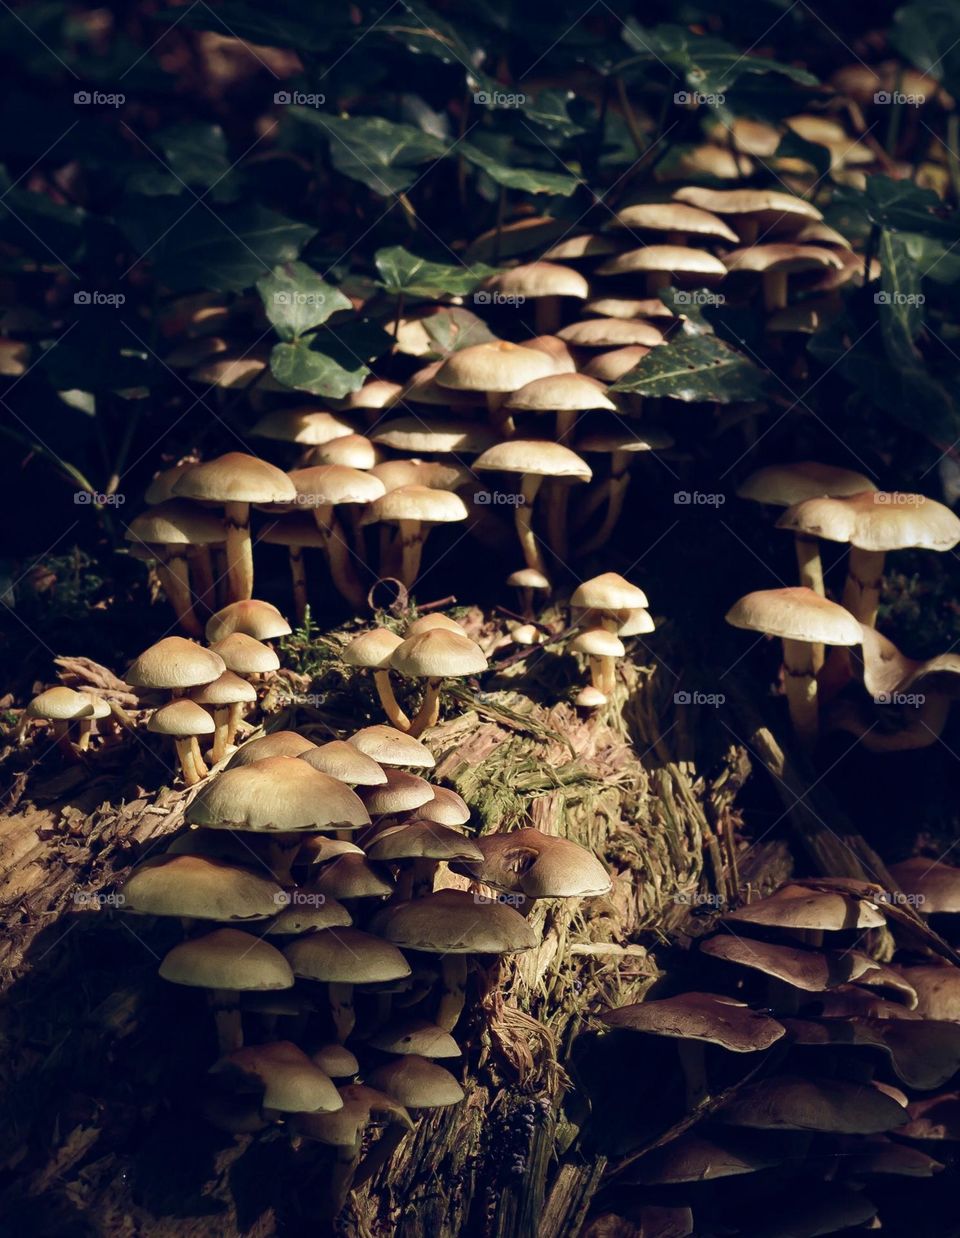 A large cluster of Hymenogastraceae mushrooms growing under dappled light on a tree stump